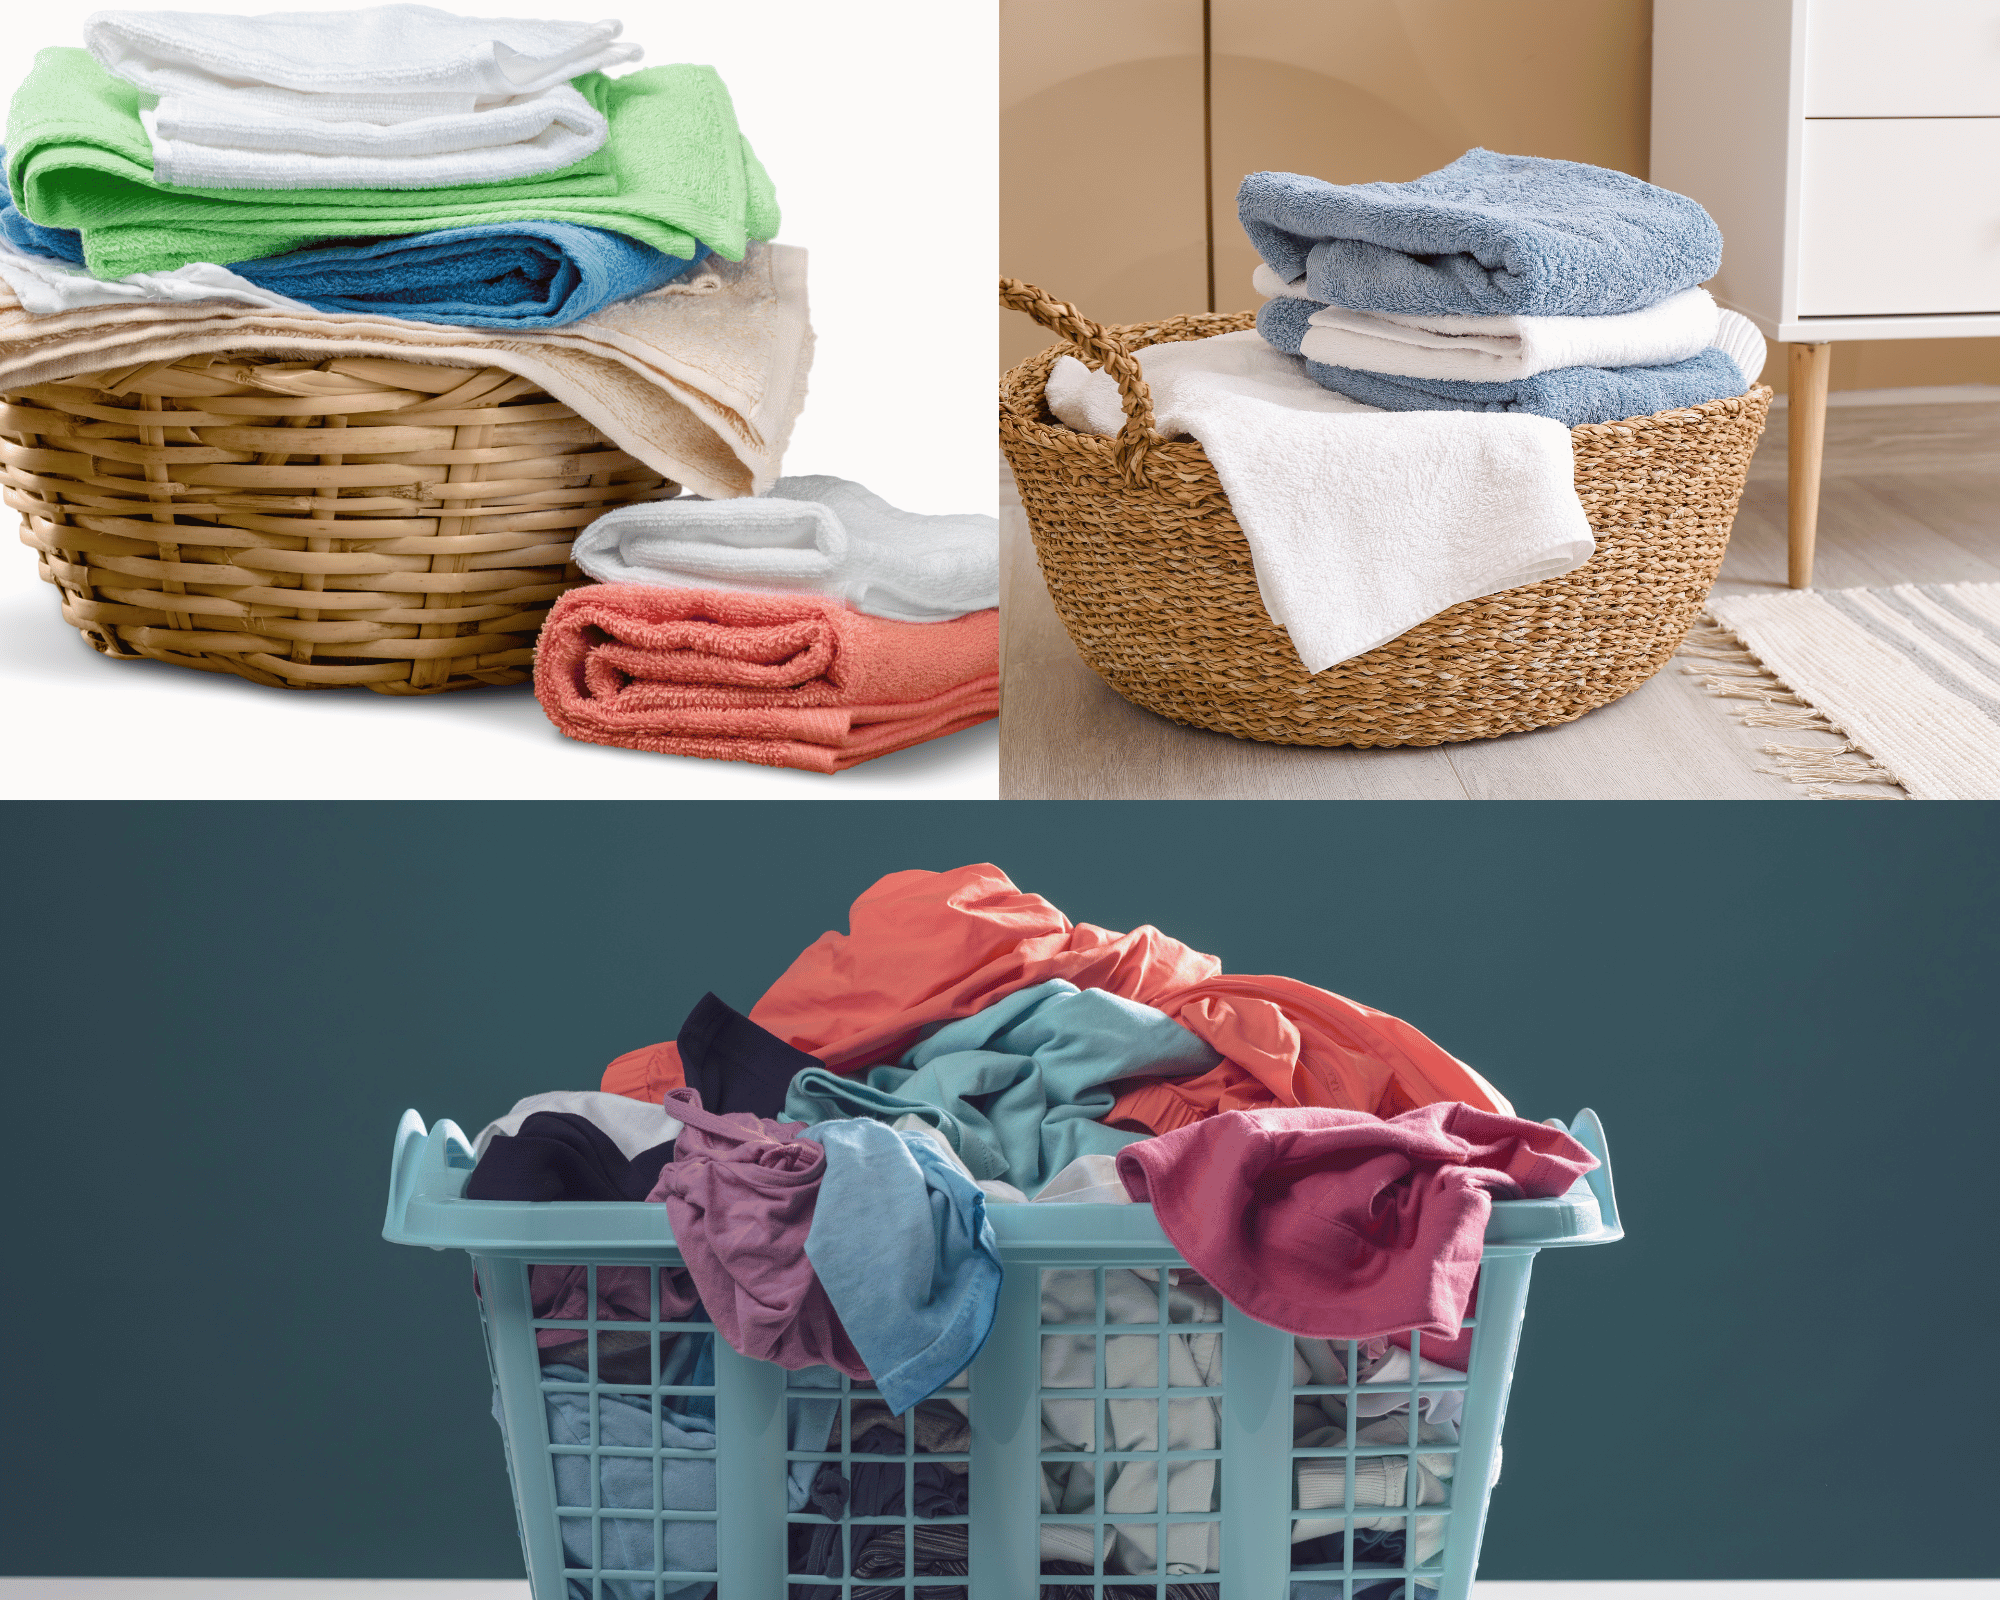 Narrow Laundry Baskets That Will Revolutionize Your Laundry Routine